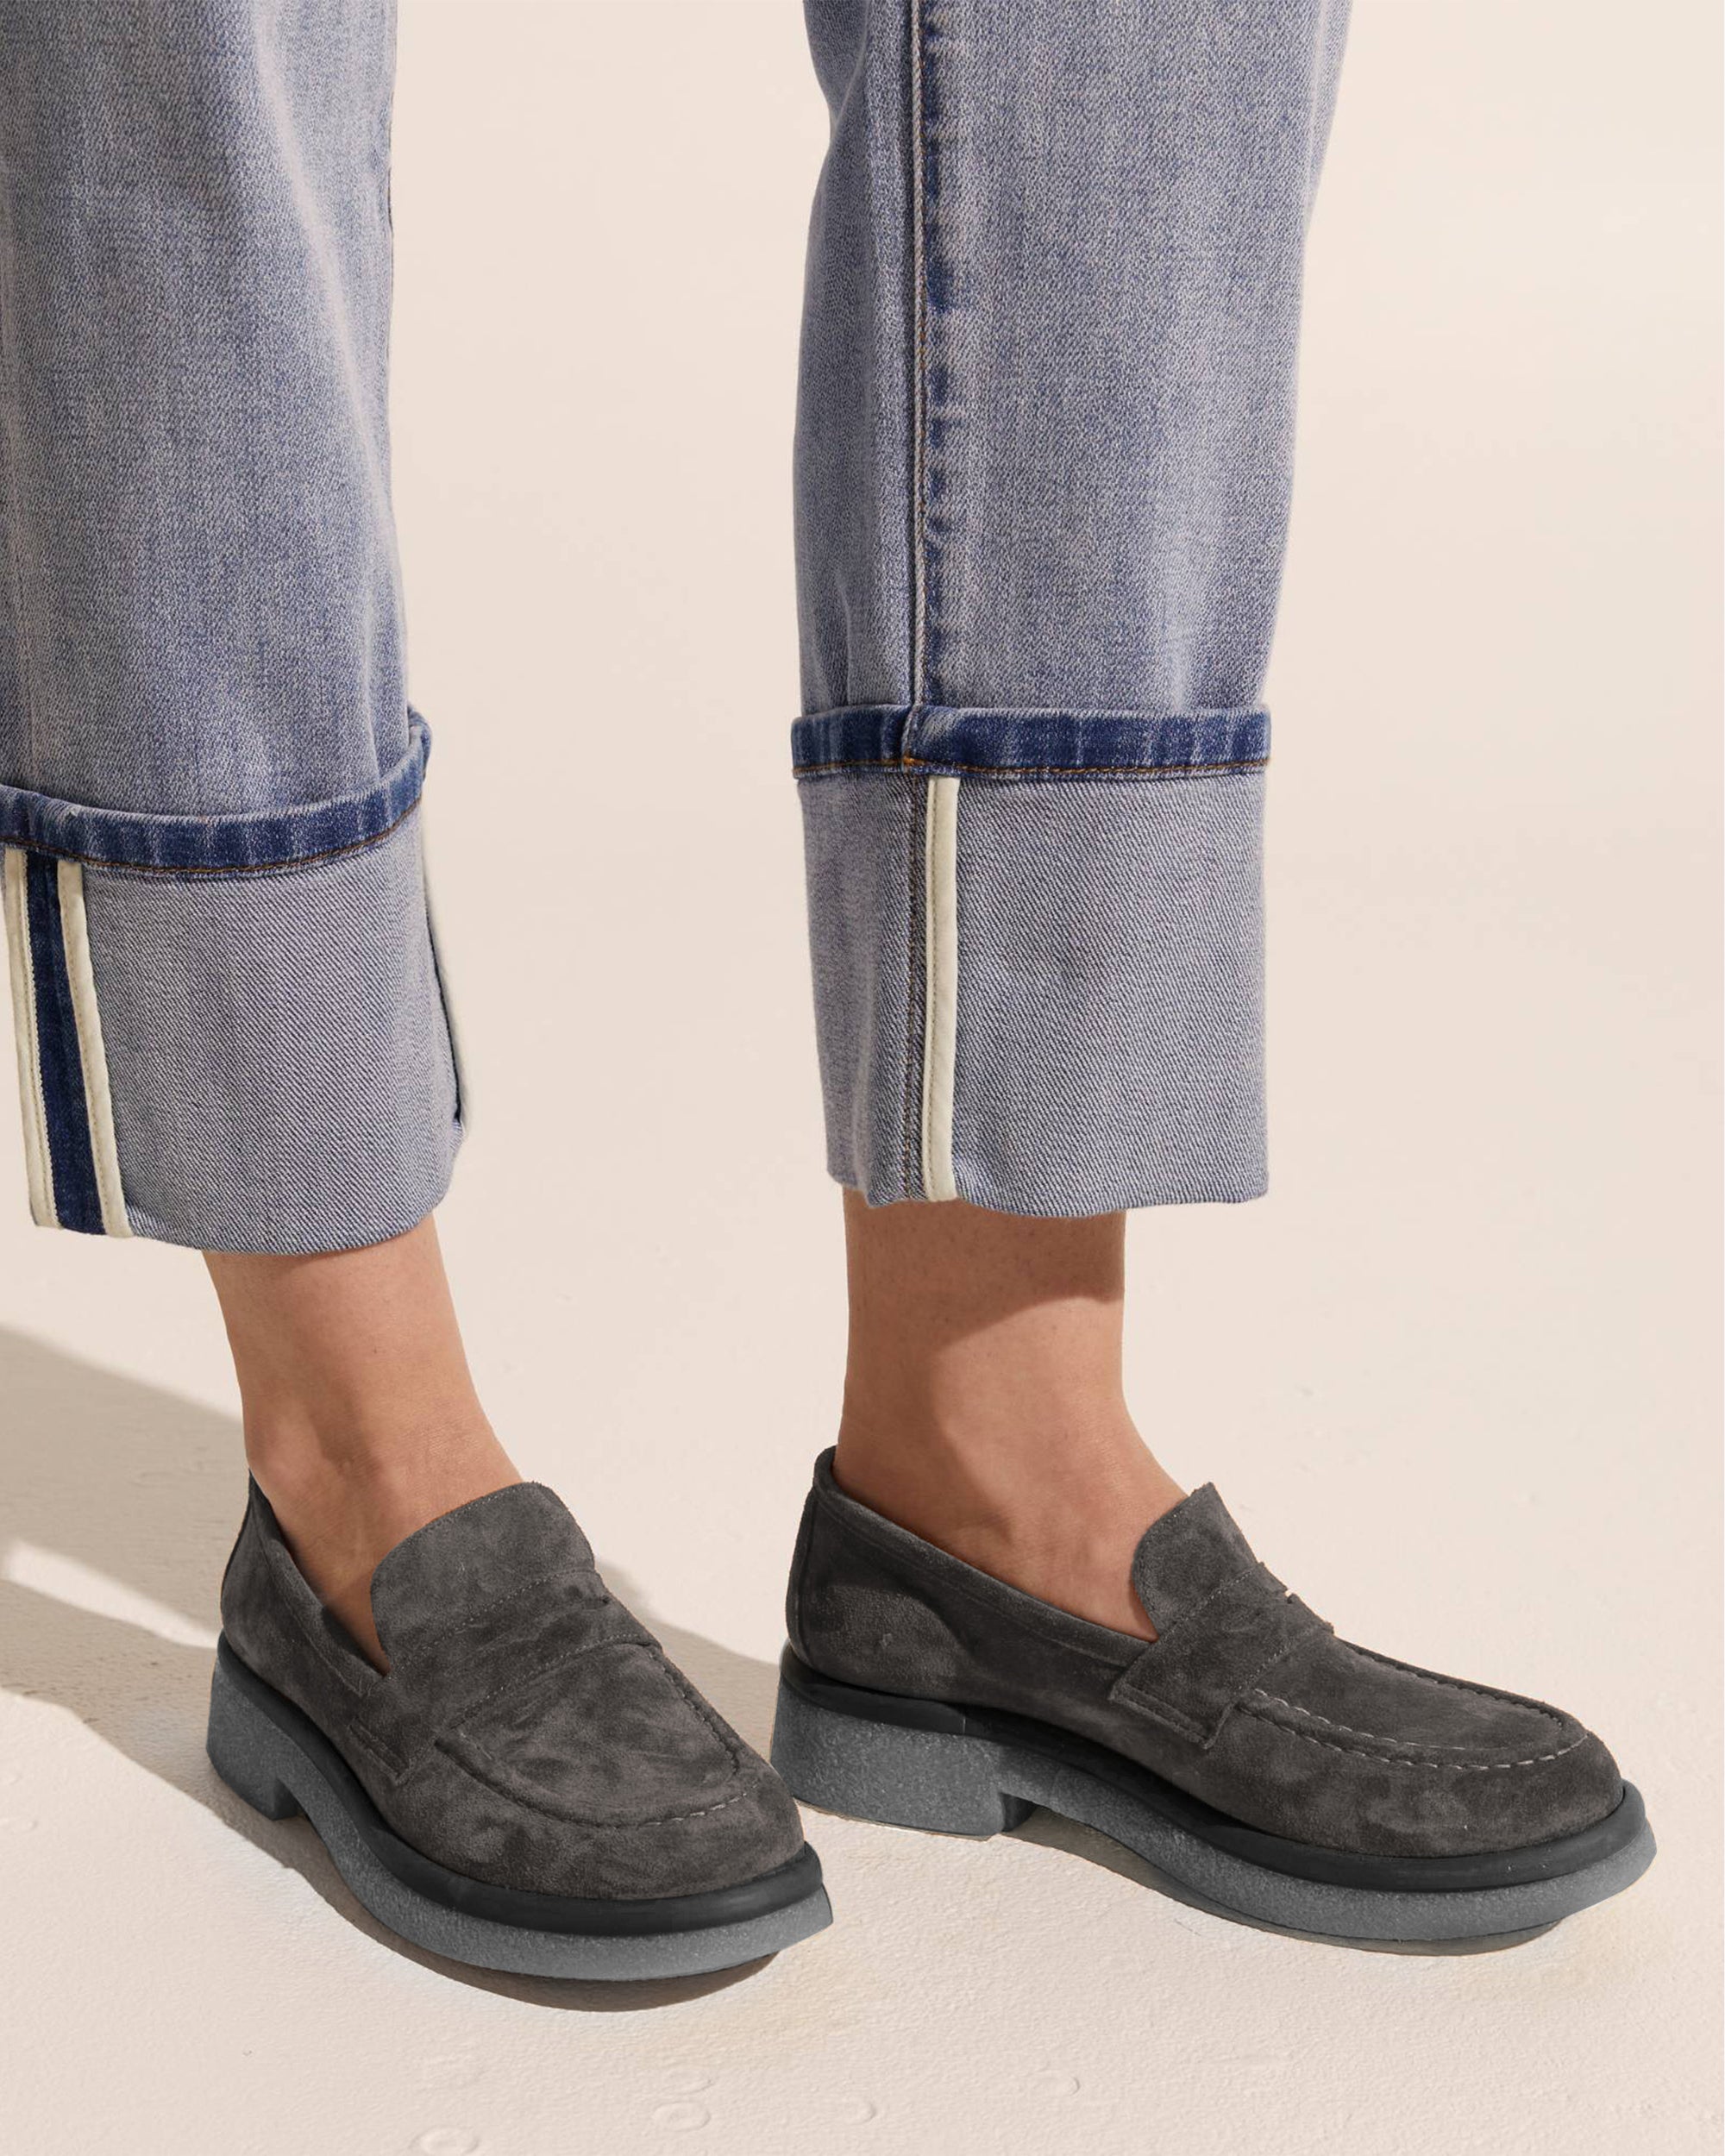 lotto loafer - grey suede